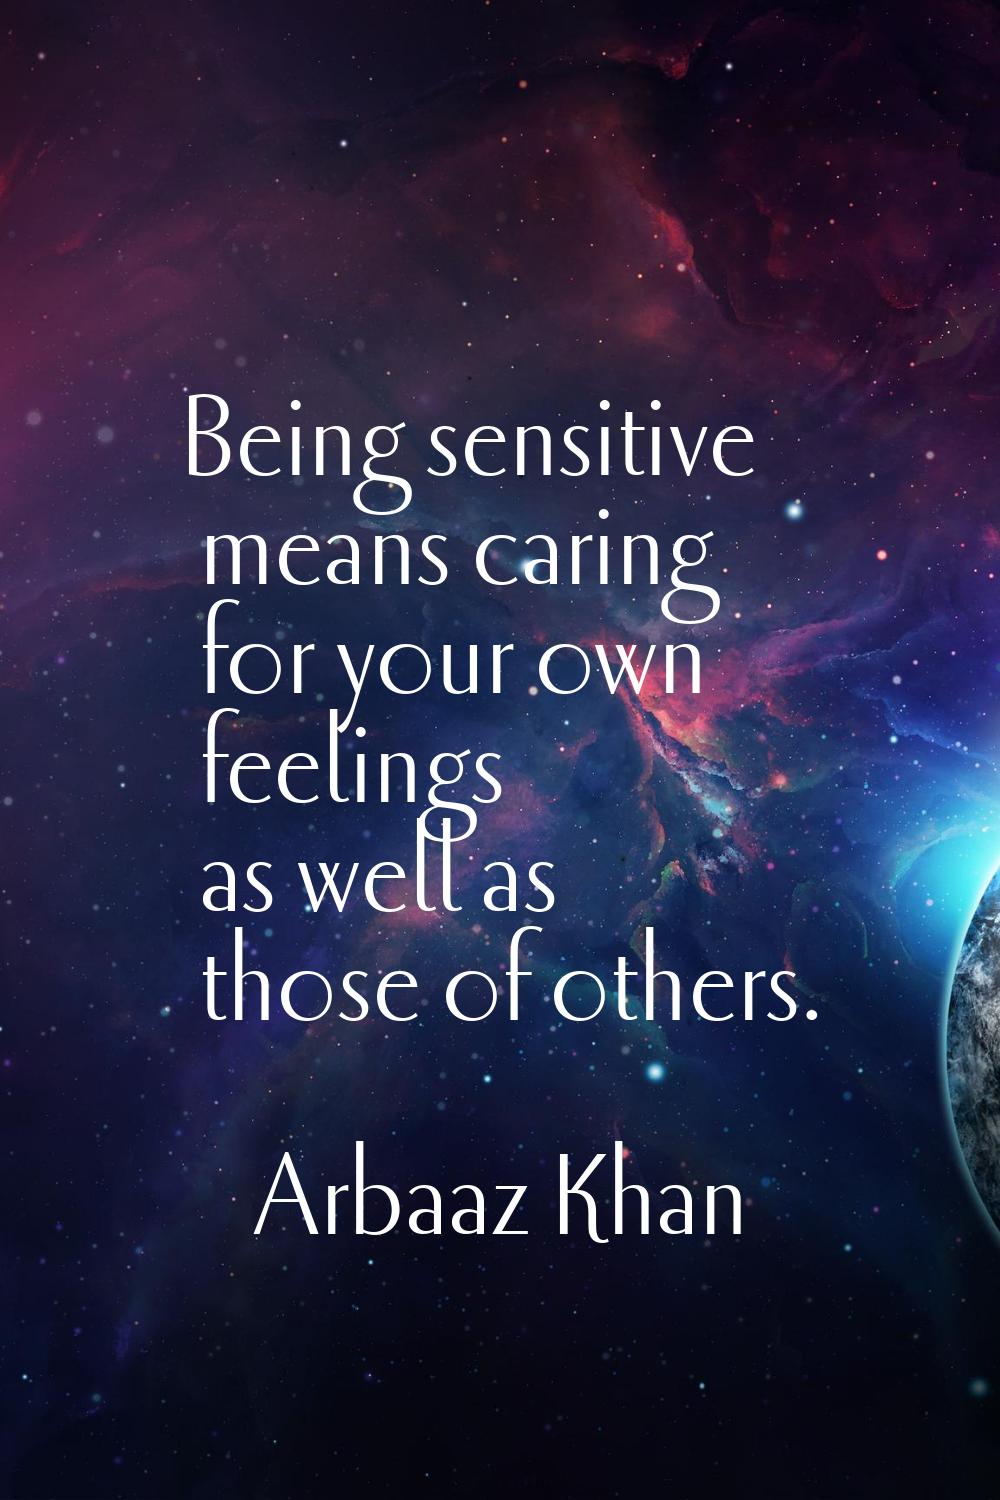 Being sensitive means caring for your own feelings as well as those of others.